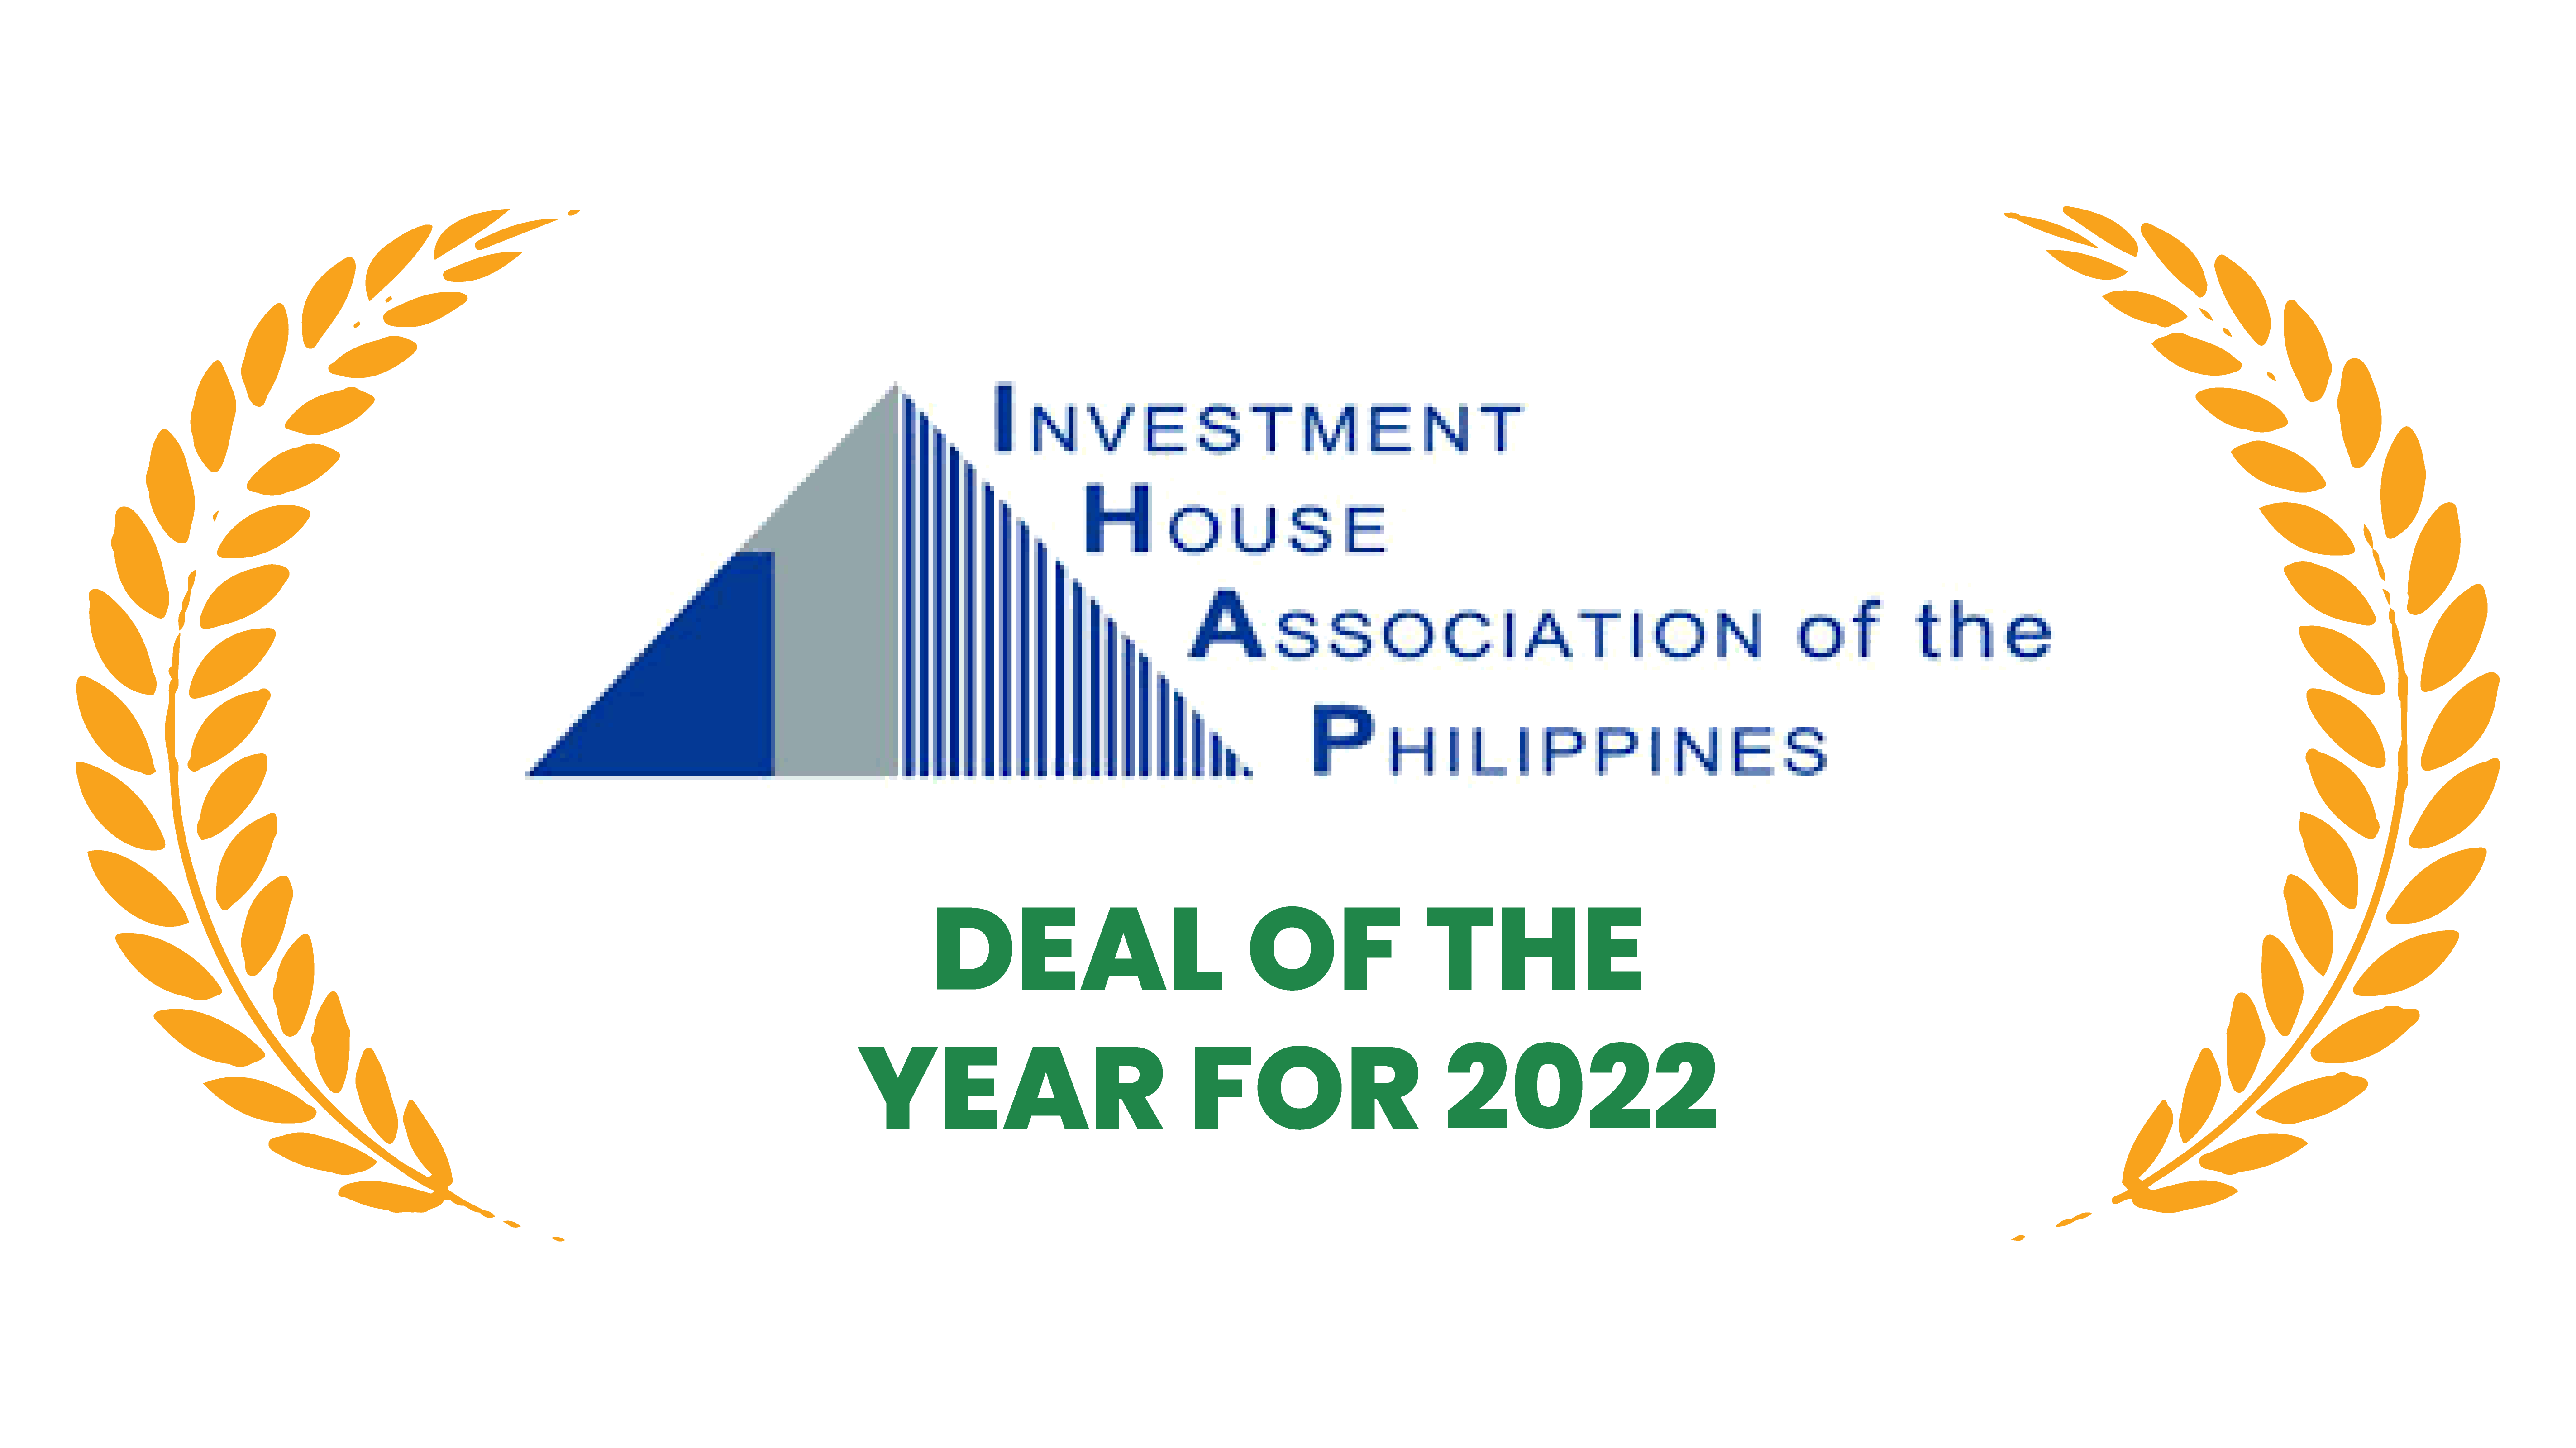 Investment House Association of the Philippines - Deal of the Year for 2022